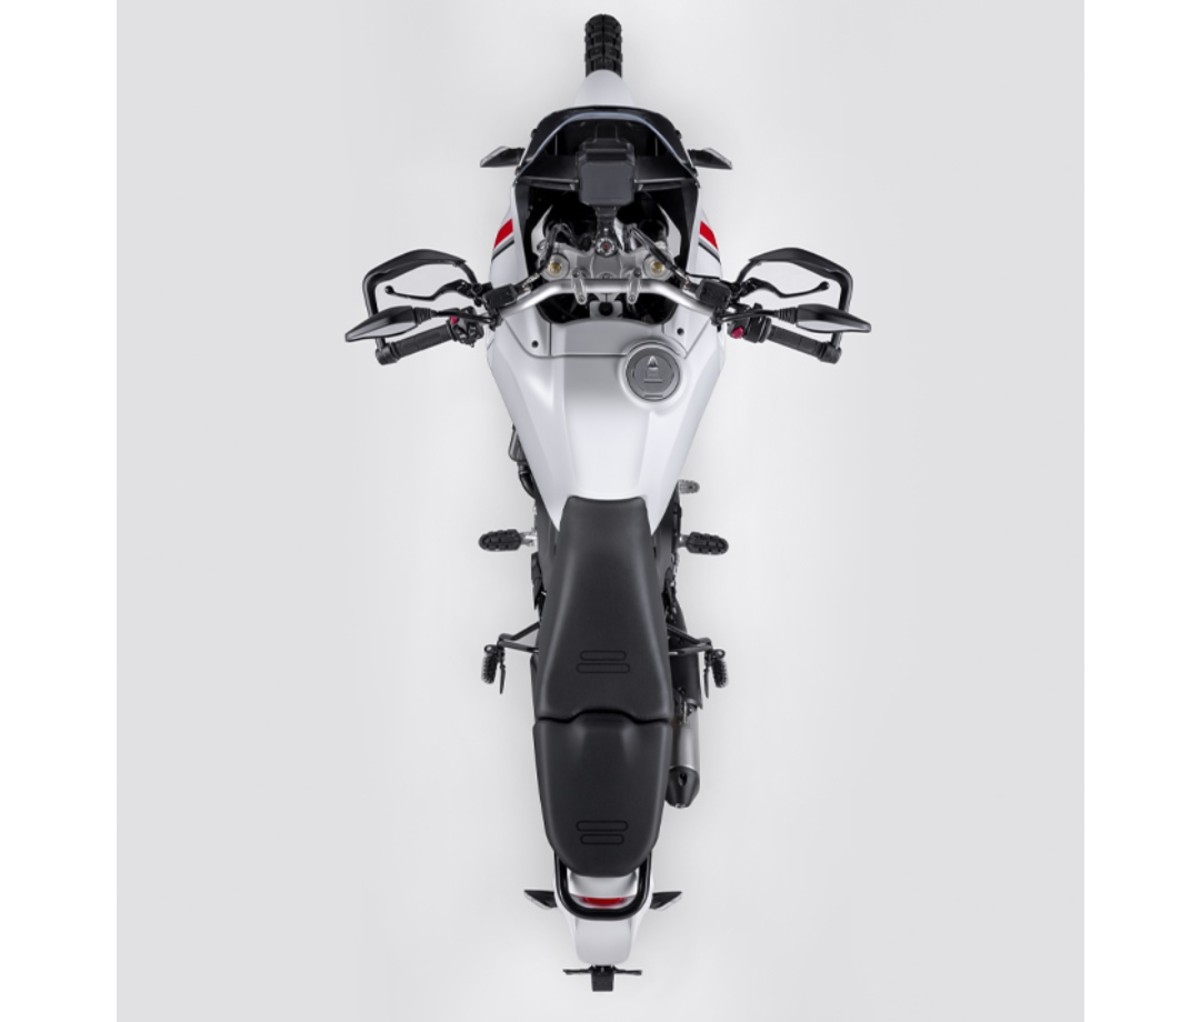 Top down shot of an adventure motorcycle on an off-white background.